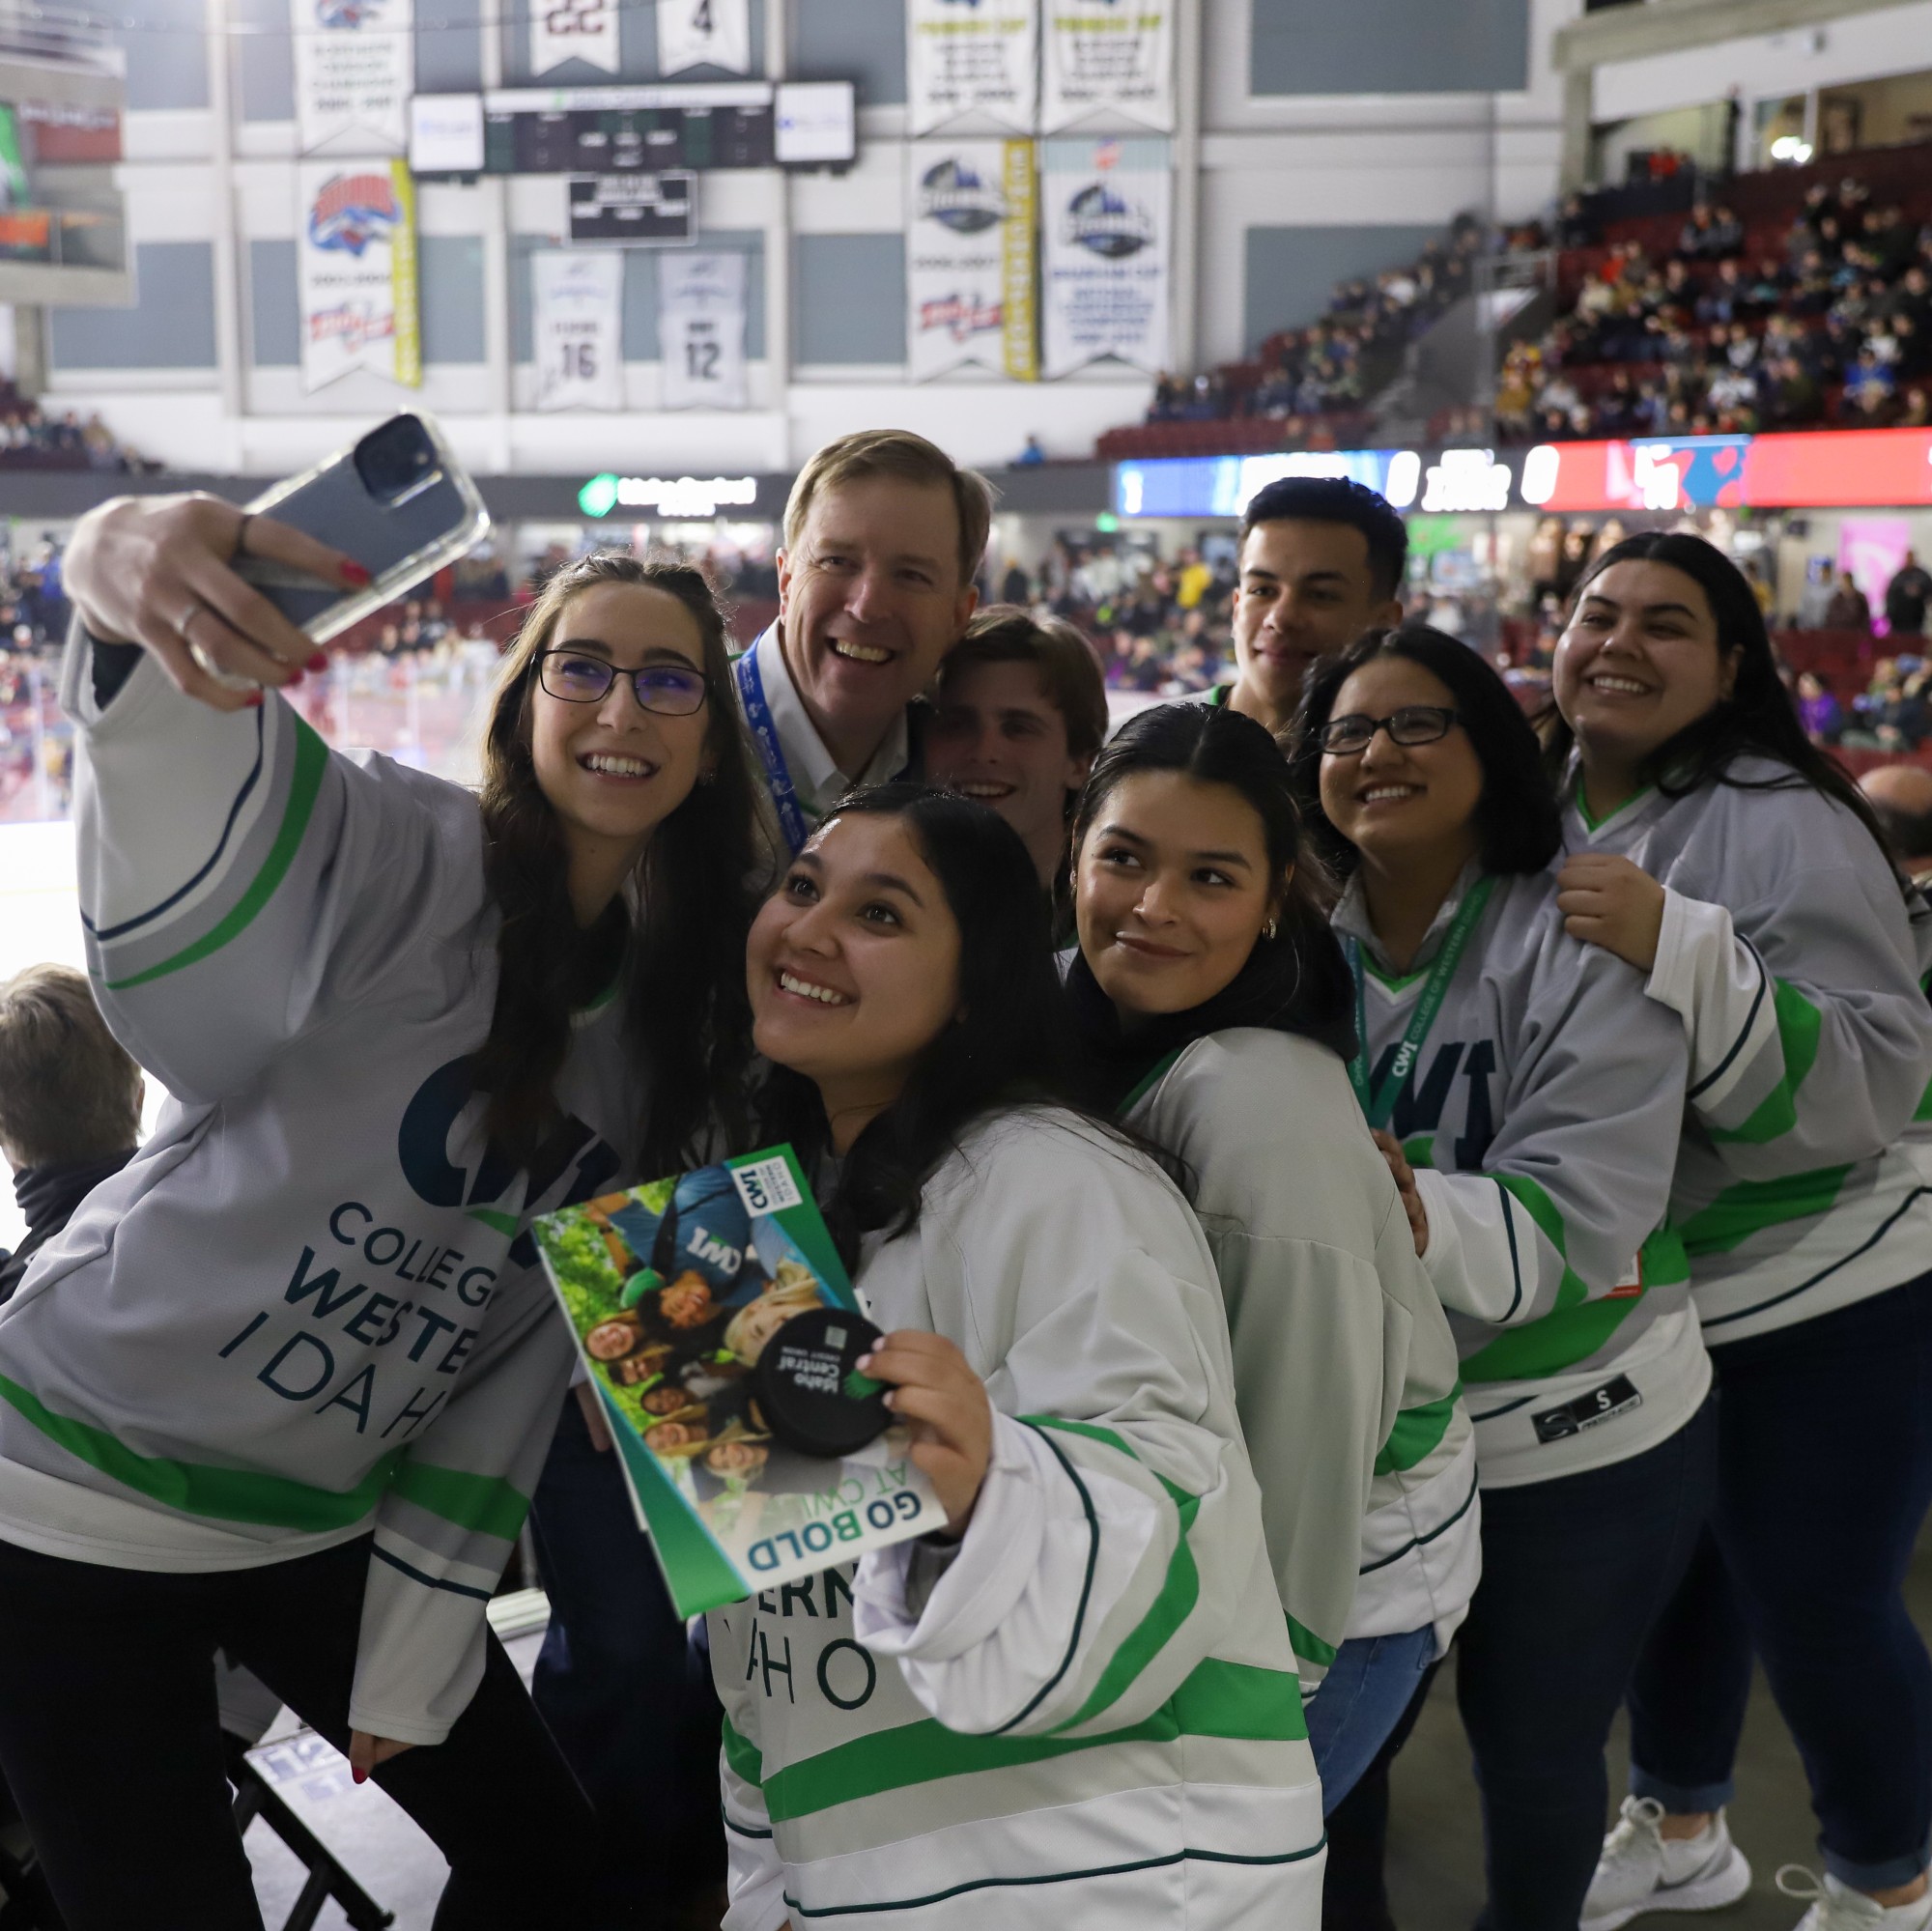 Students take a selfie with College president at a hockey game